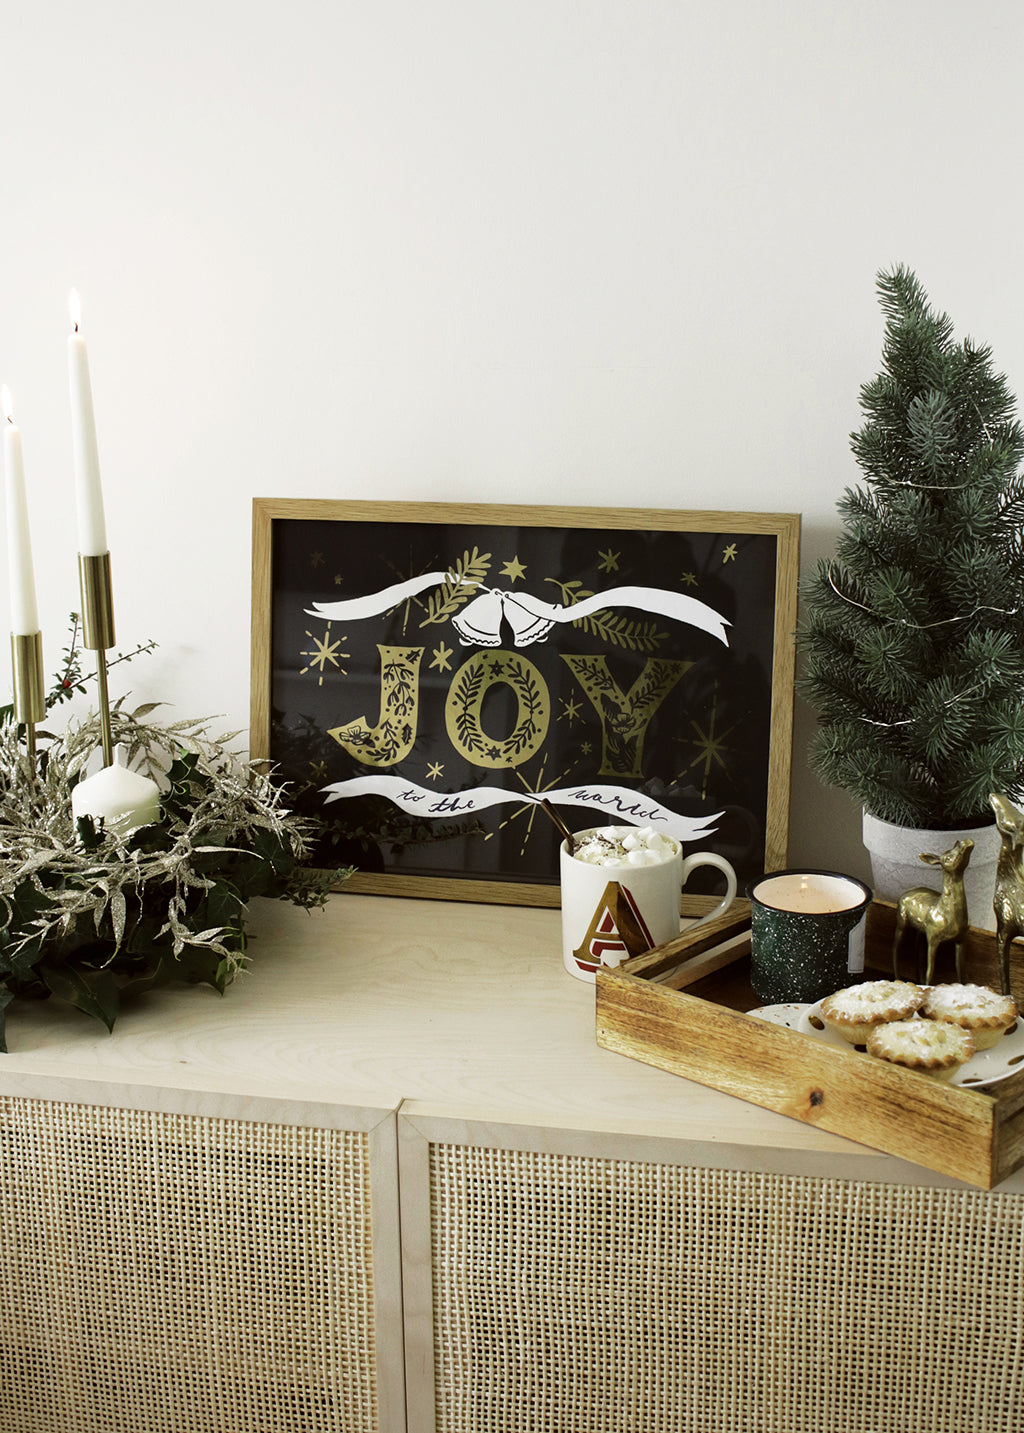 Navy Christmas Print With Gold Joy Lettering And Stars In An Oak Frame With Mug Of A Hot Chocolate - Annie Dornan Smith